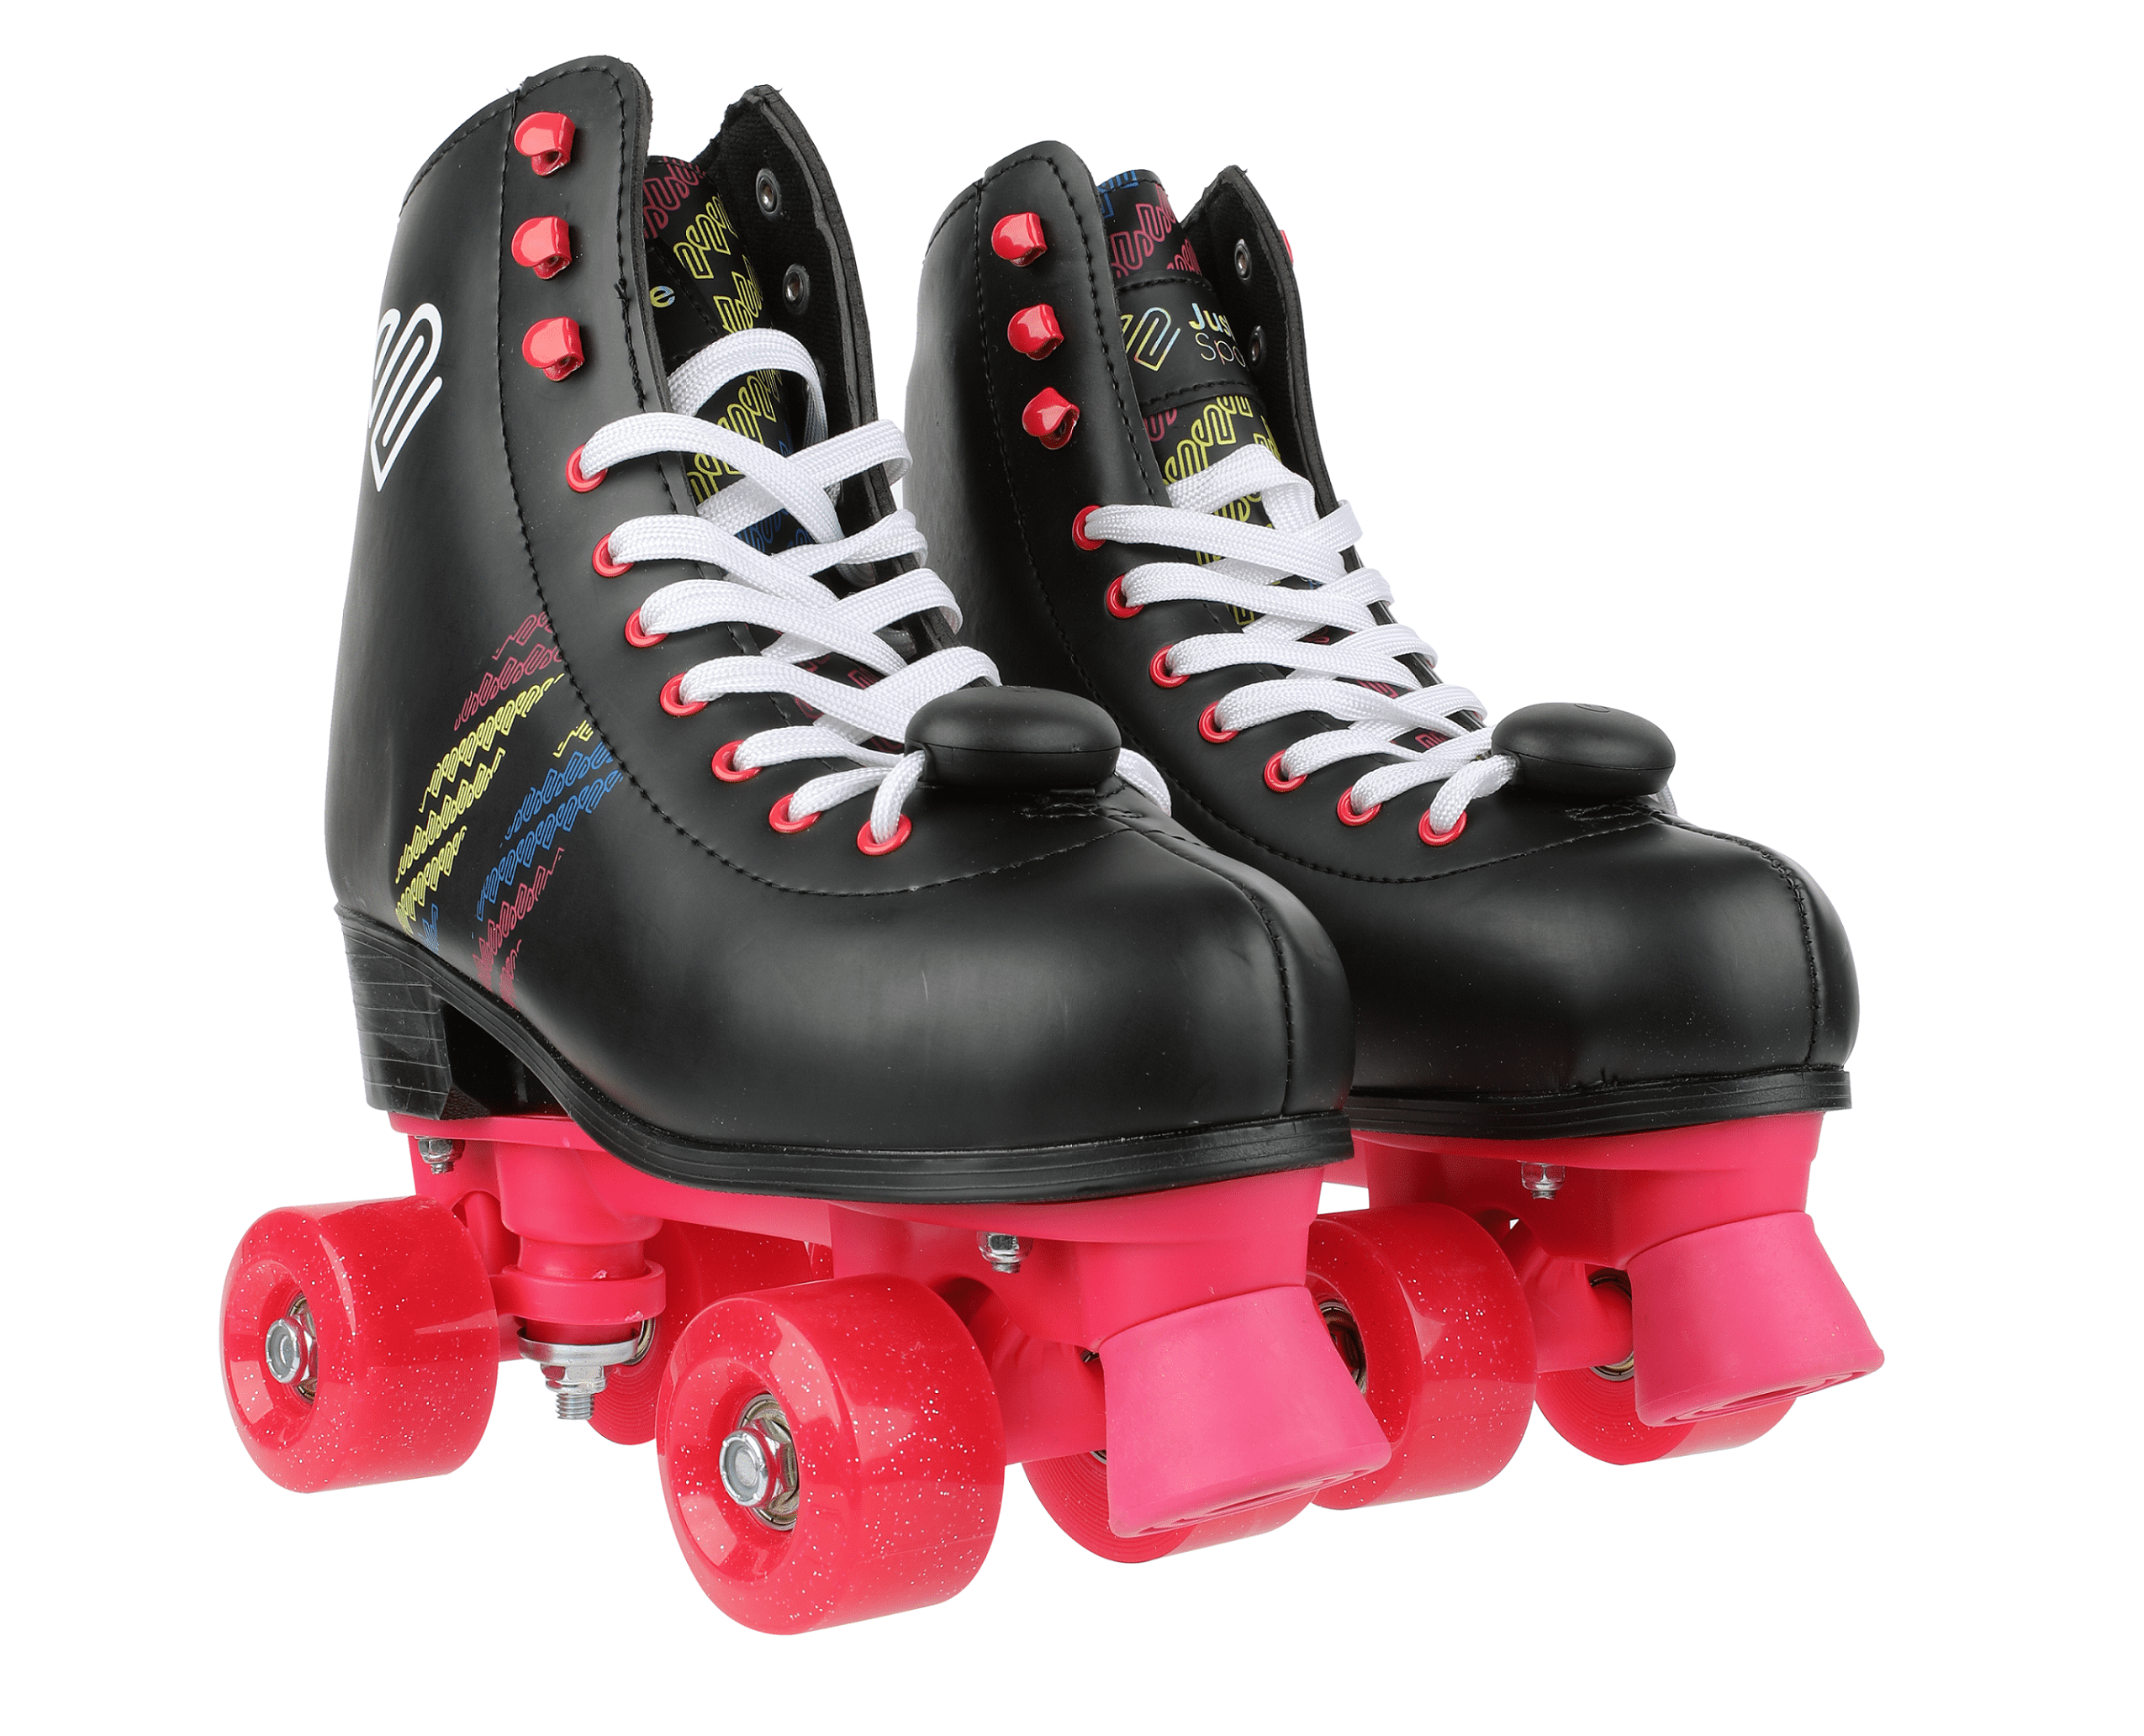 WOMEN LADY GIRL YOUTH ROLLER SKATES QUAD FOUR WHEELS HIGH TOP BLACK COLOR 